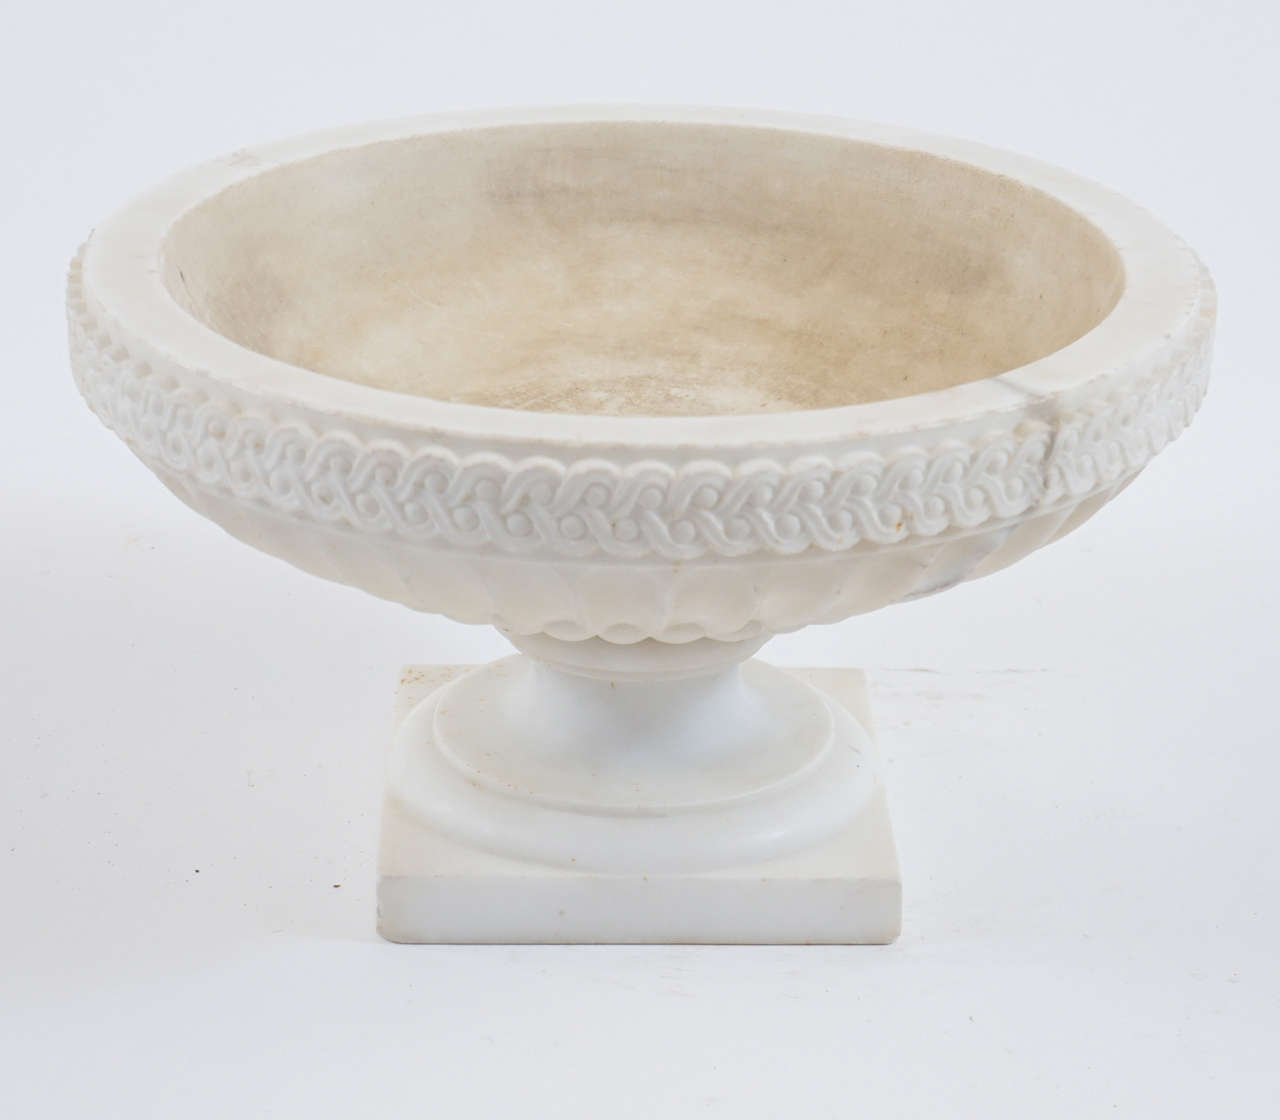 Exquisite large Italian statuary marble urn of tazza form having carved interlacement band surmounting gadrooned stop-fluted basin on socle base.